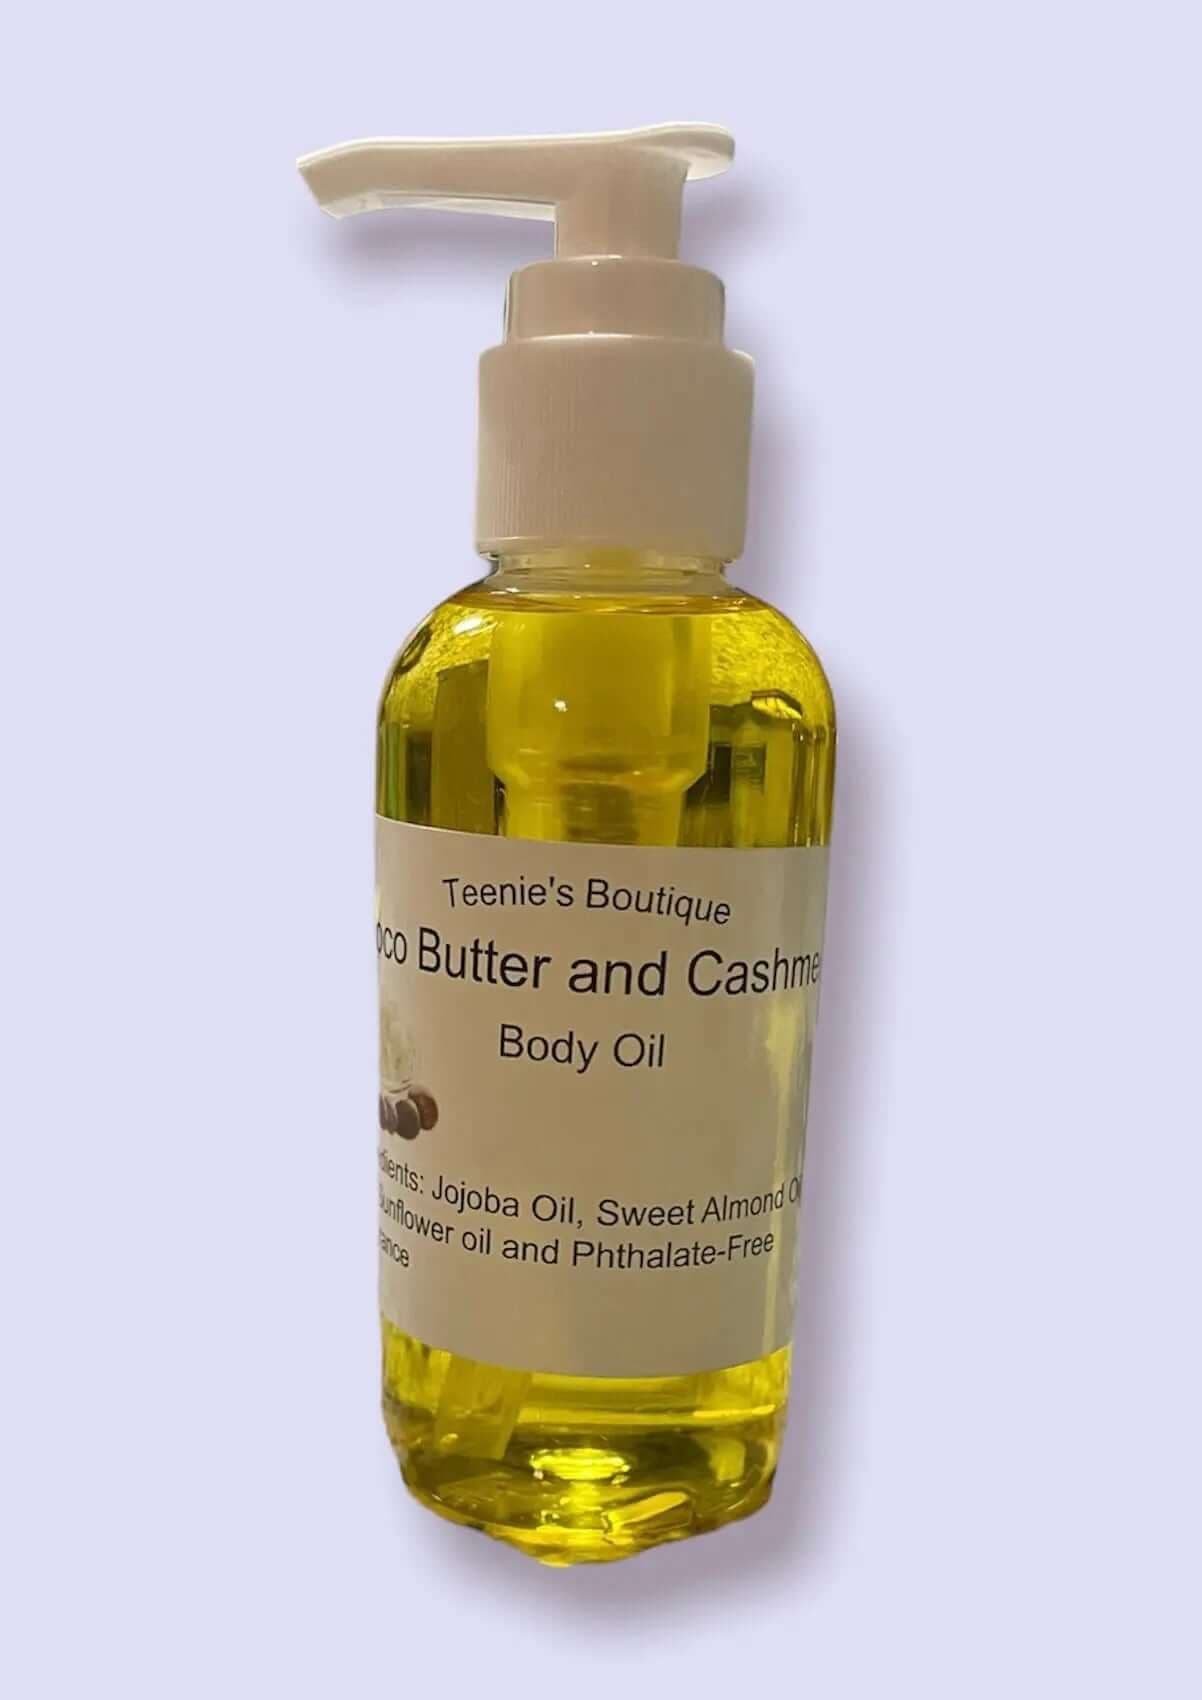 Hydrating Body Oil - Teenies Boutique Coco Butter and Cashmere Body Oil